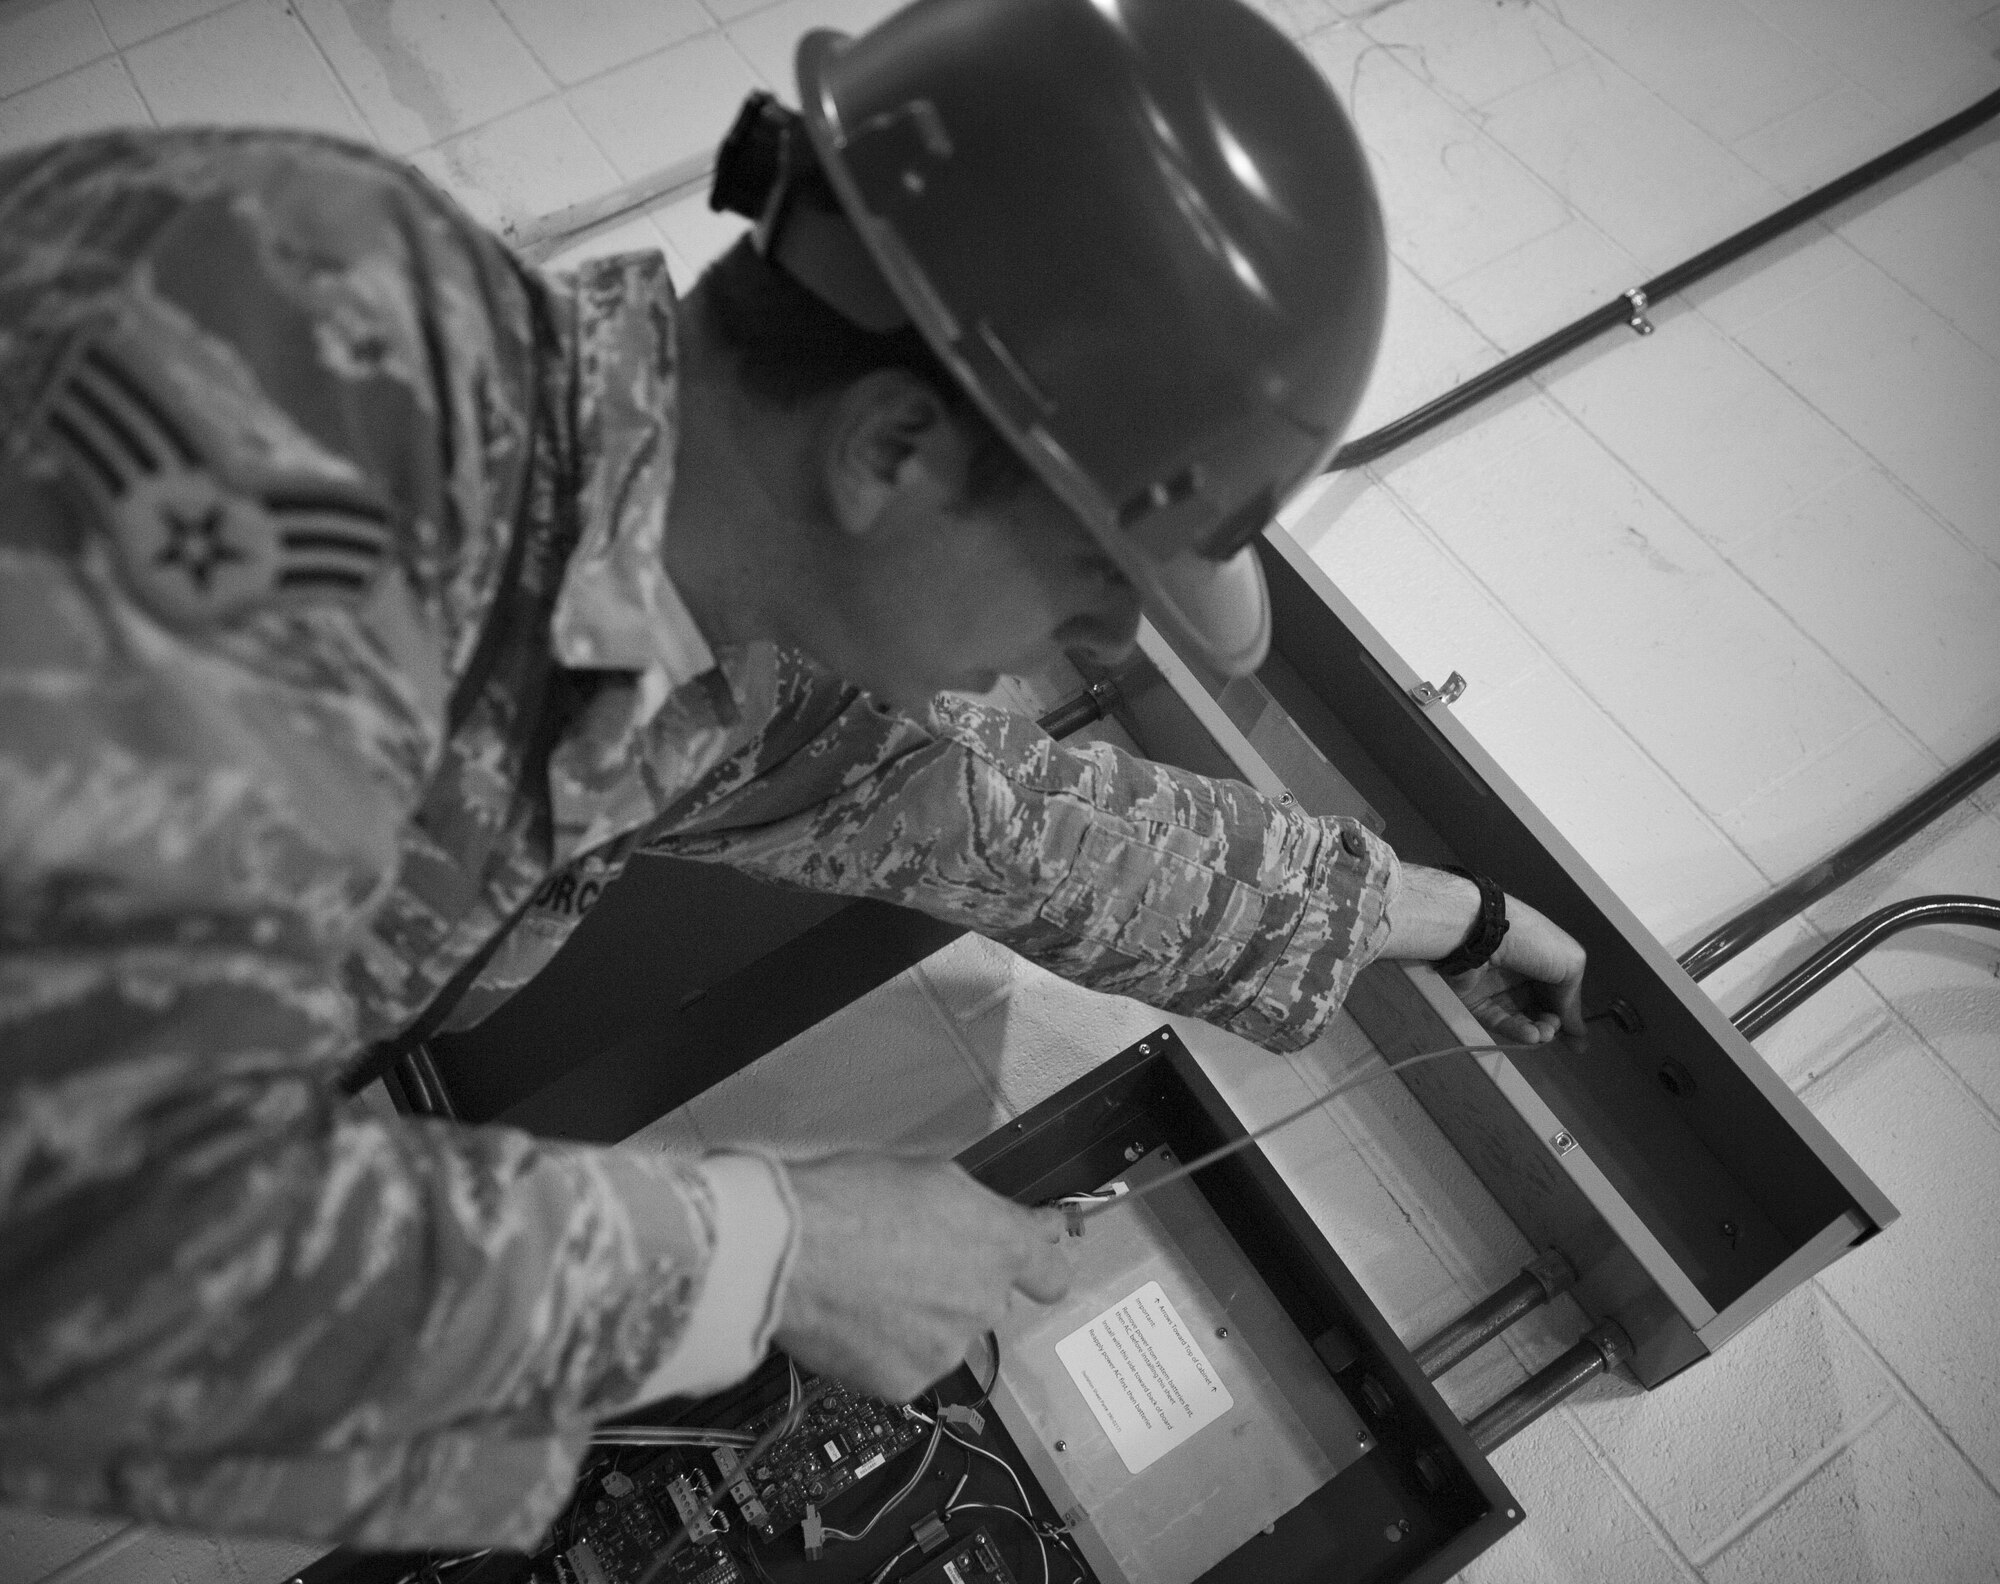 Senior Airman Alex Thurner, 1st Special Operations Civil Engineer Squadron electrical systems journeyman, runs wiring through a conduit on Hurlburt Field, Fla., Feb. 18, 2015. The life safety section installs and maintains fire suppression and alarm systems for every building on base. (U.S. Air Force photo/Senior Airman Krystal M. Garrett)